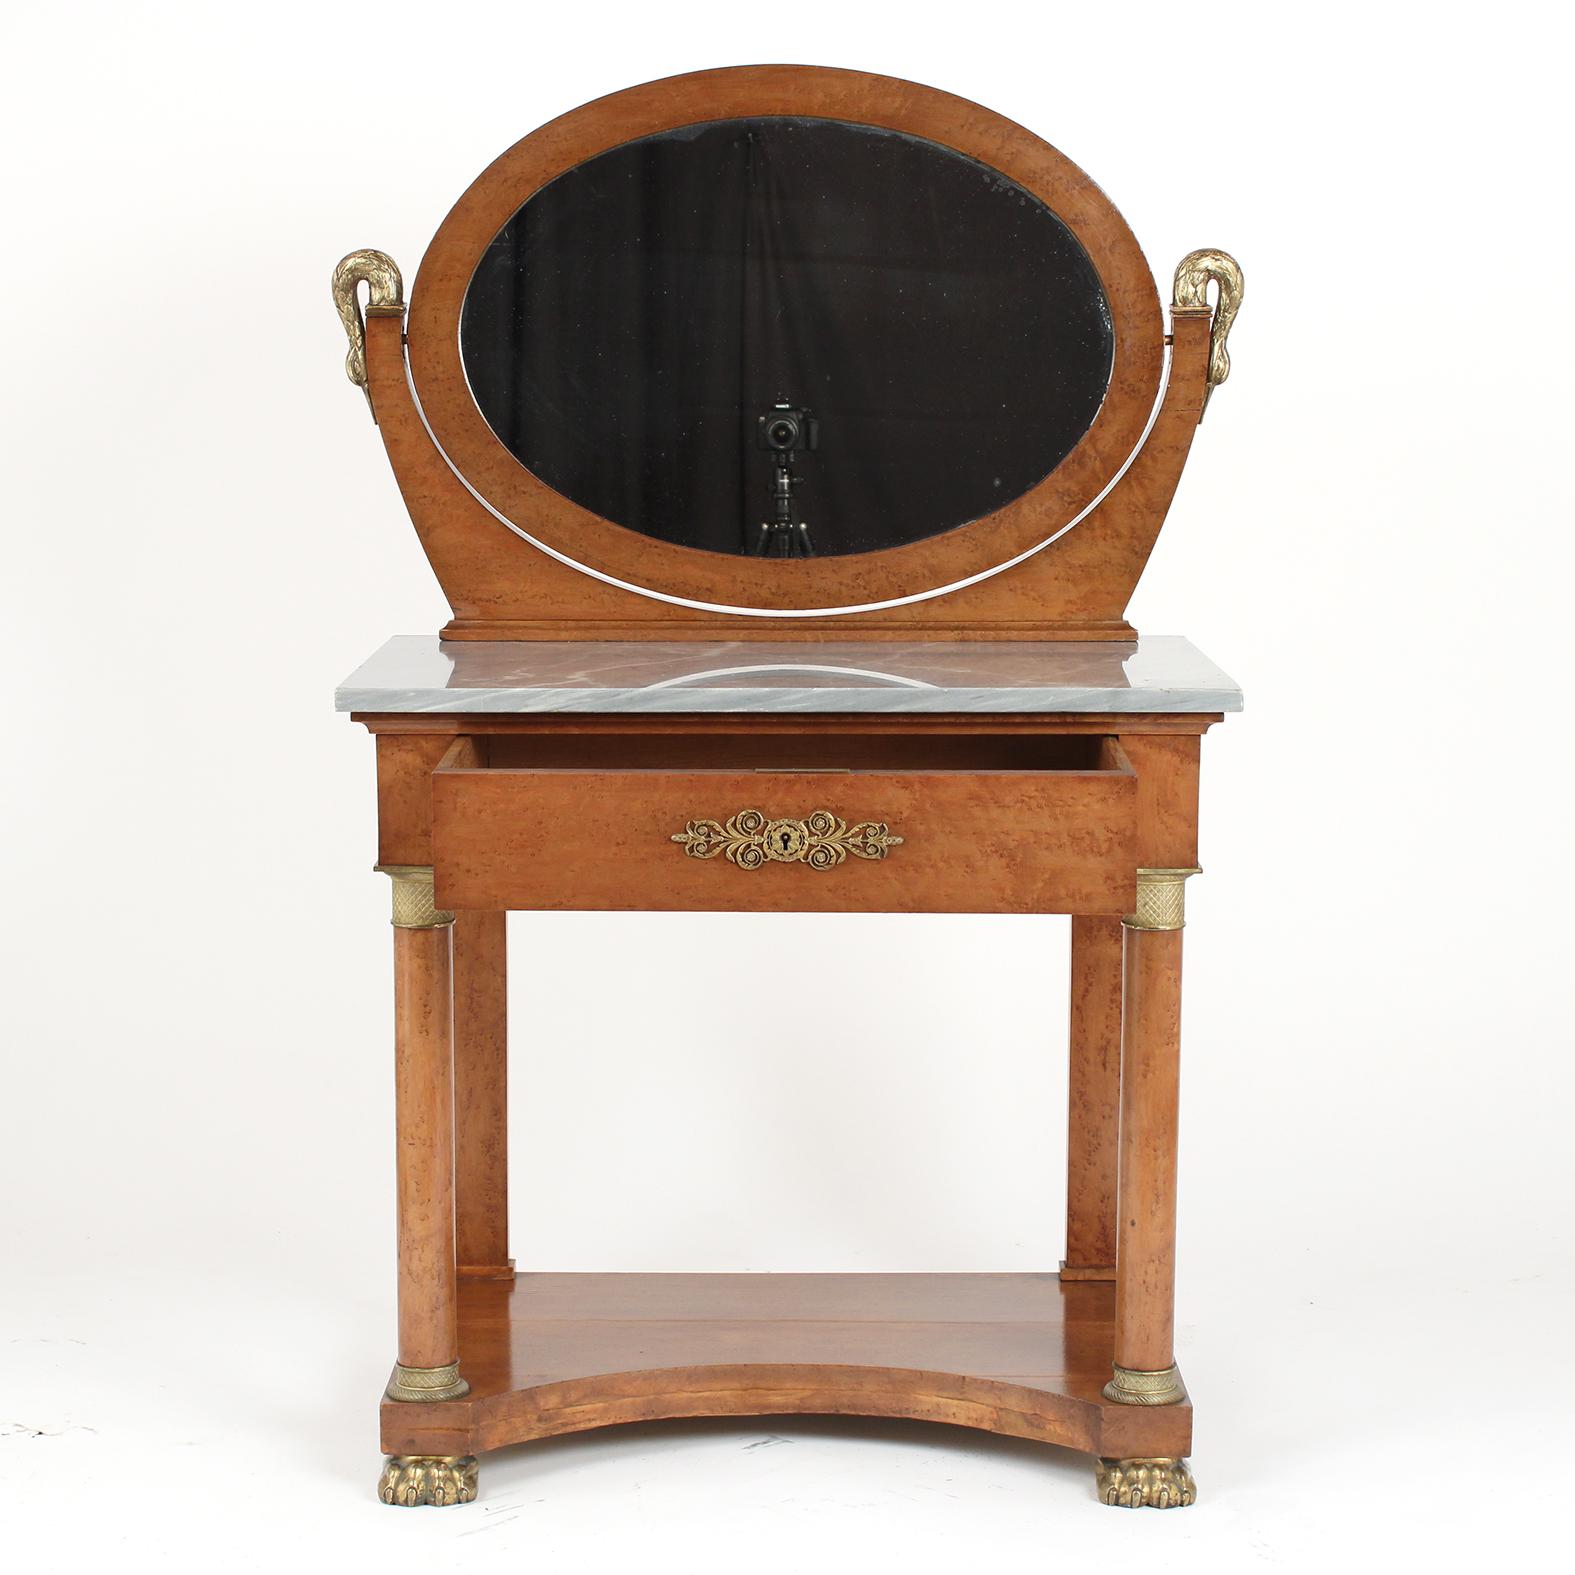 This French 19th Century Empire Style Vanity Table is made out of maple wood covered in a burled veneer with remarkable bronze accents decorations and is in very good condition. This Vanity has been professionally restored preserving its original